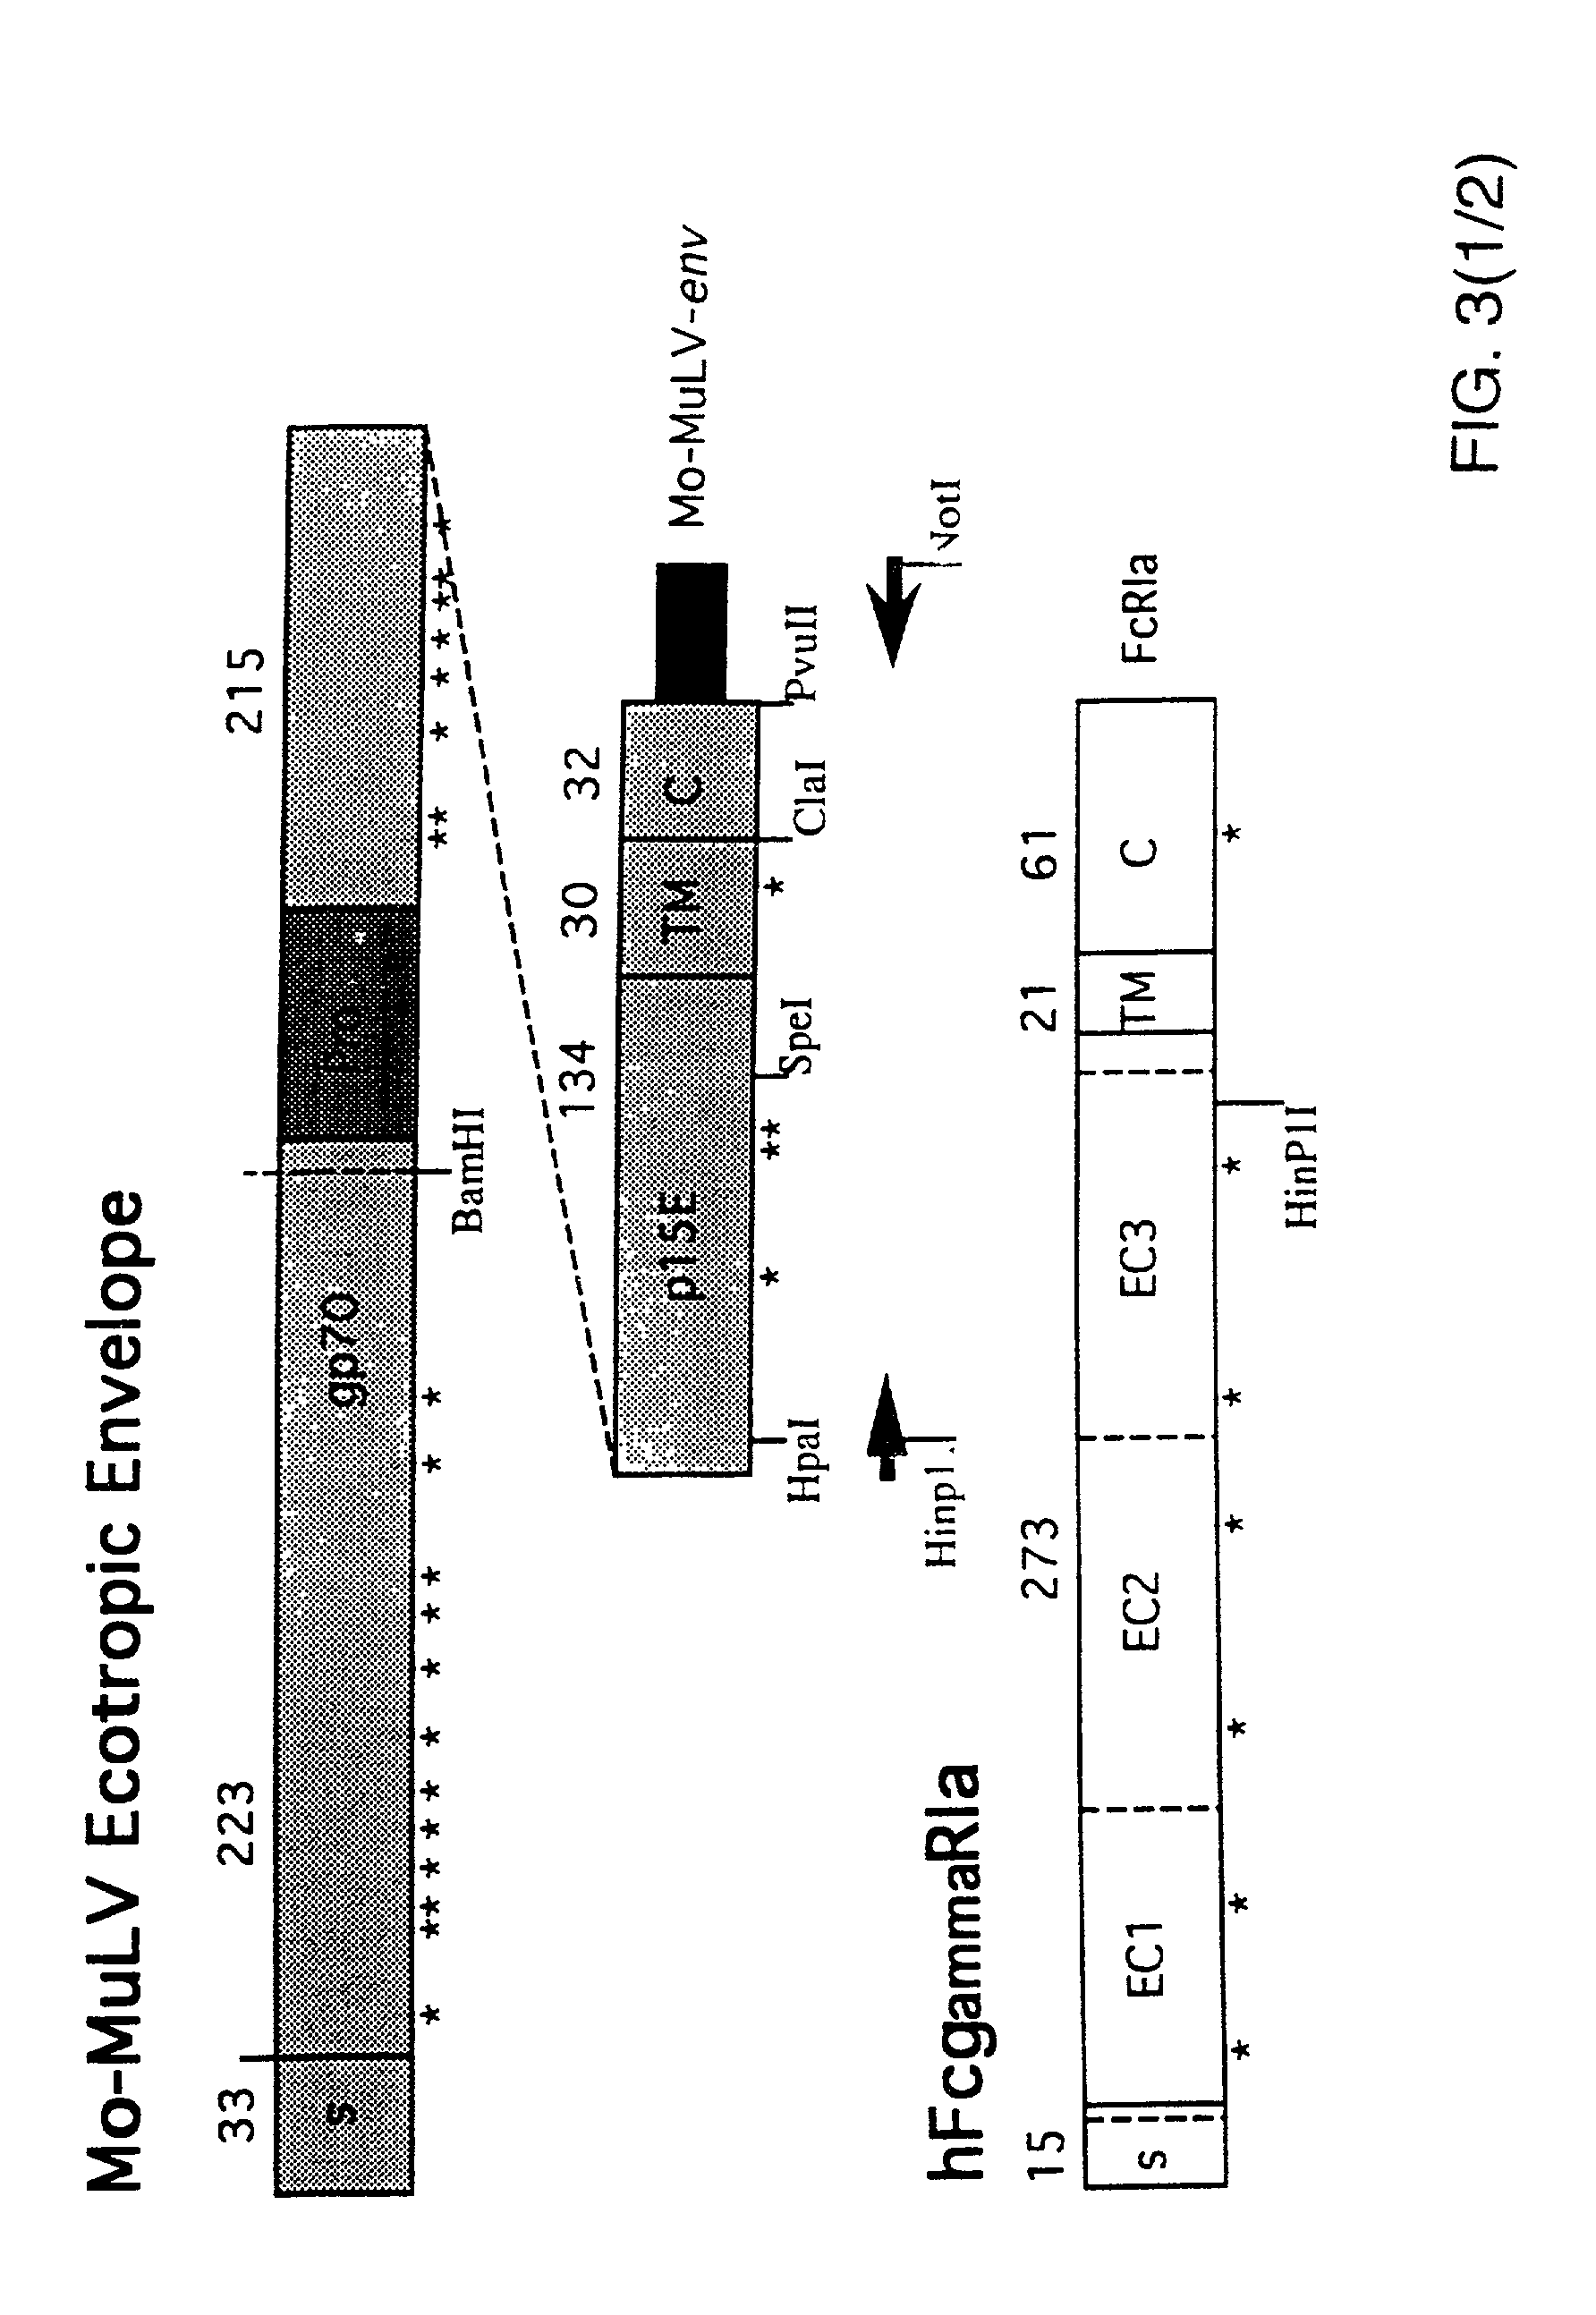 Methods and means for targeted gene delivery